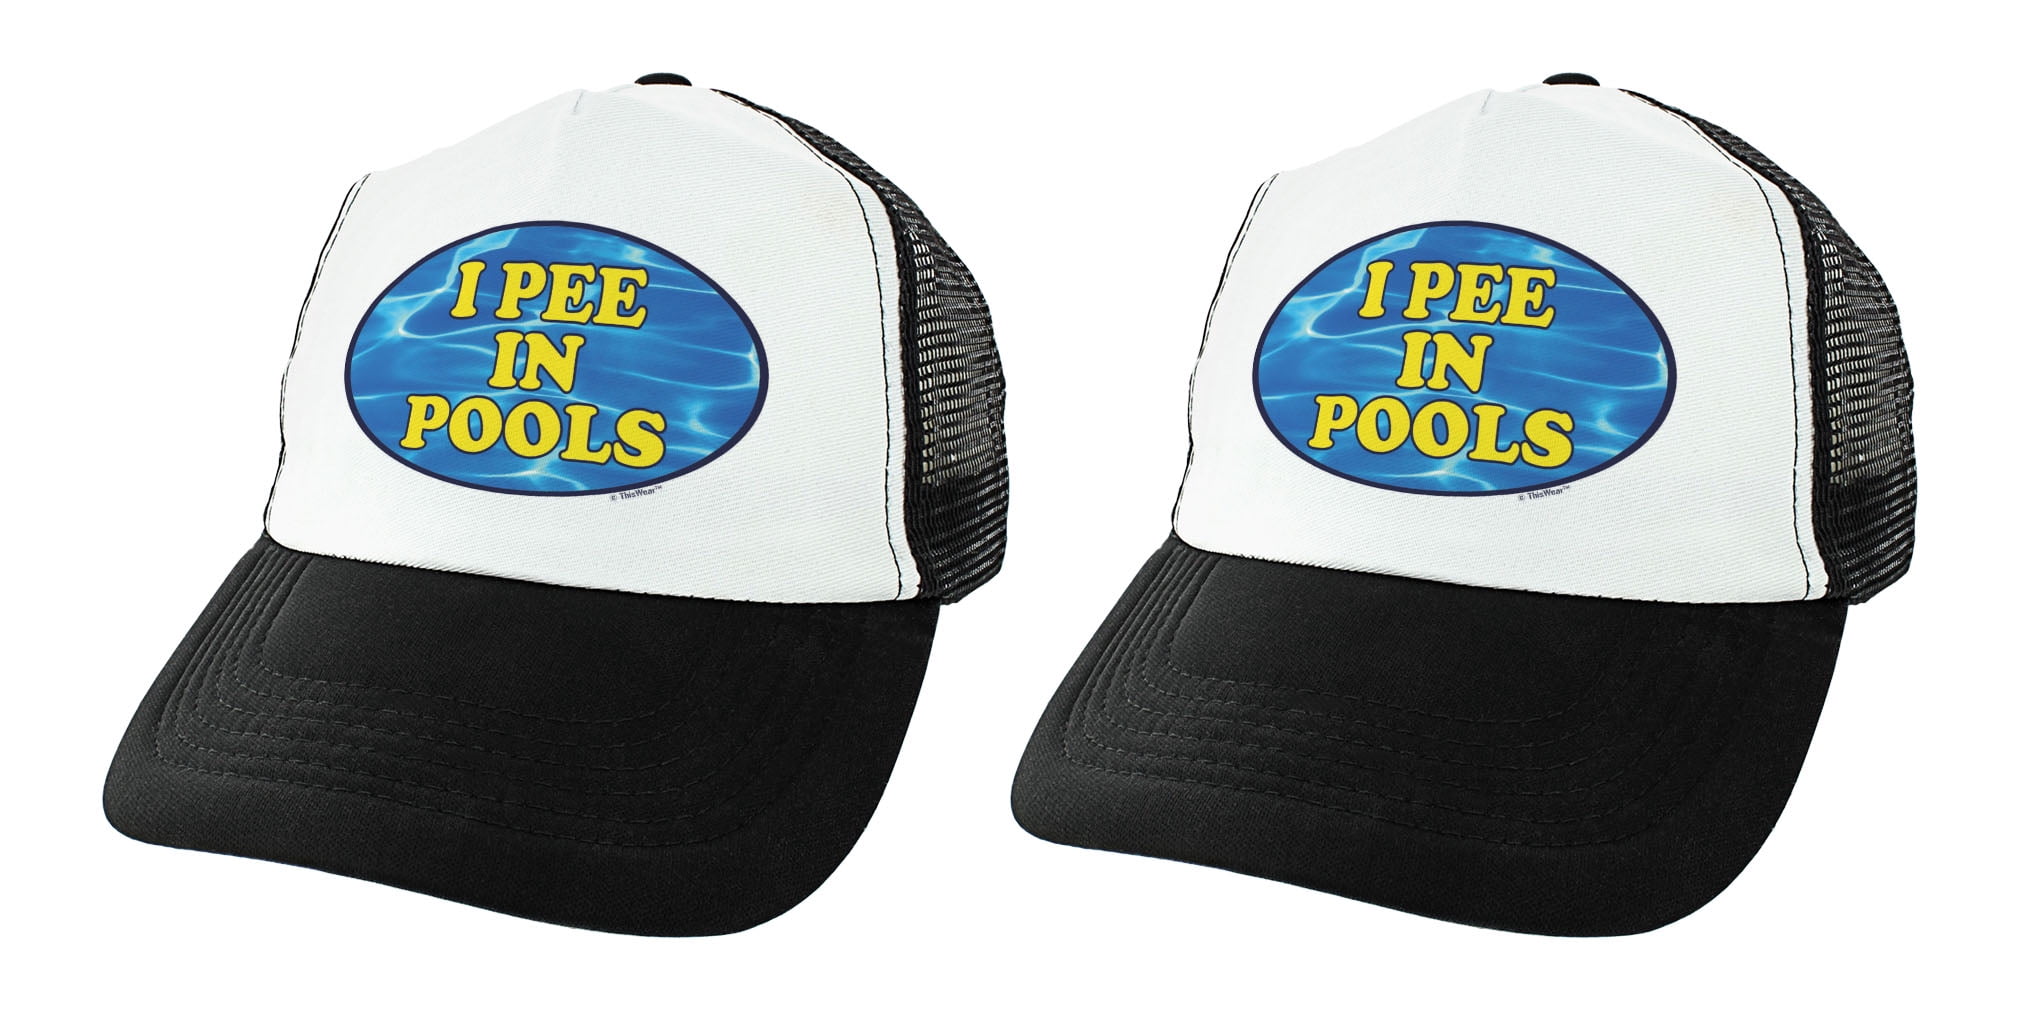 ThisWear Pool Gift Set Pee in Pools Gag Gifts for Adults Funny Summer Hat  BBQ Accessories 2-Pack Trucker Hats 